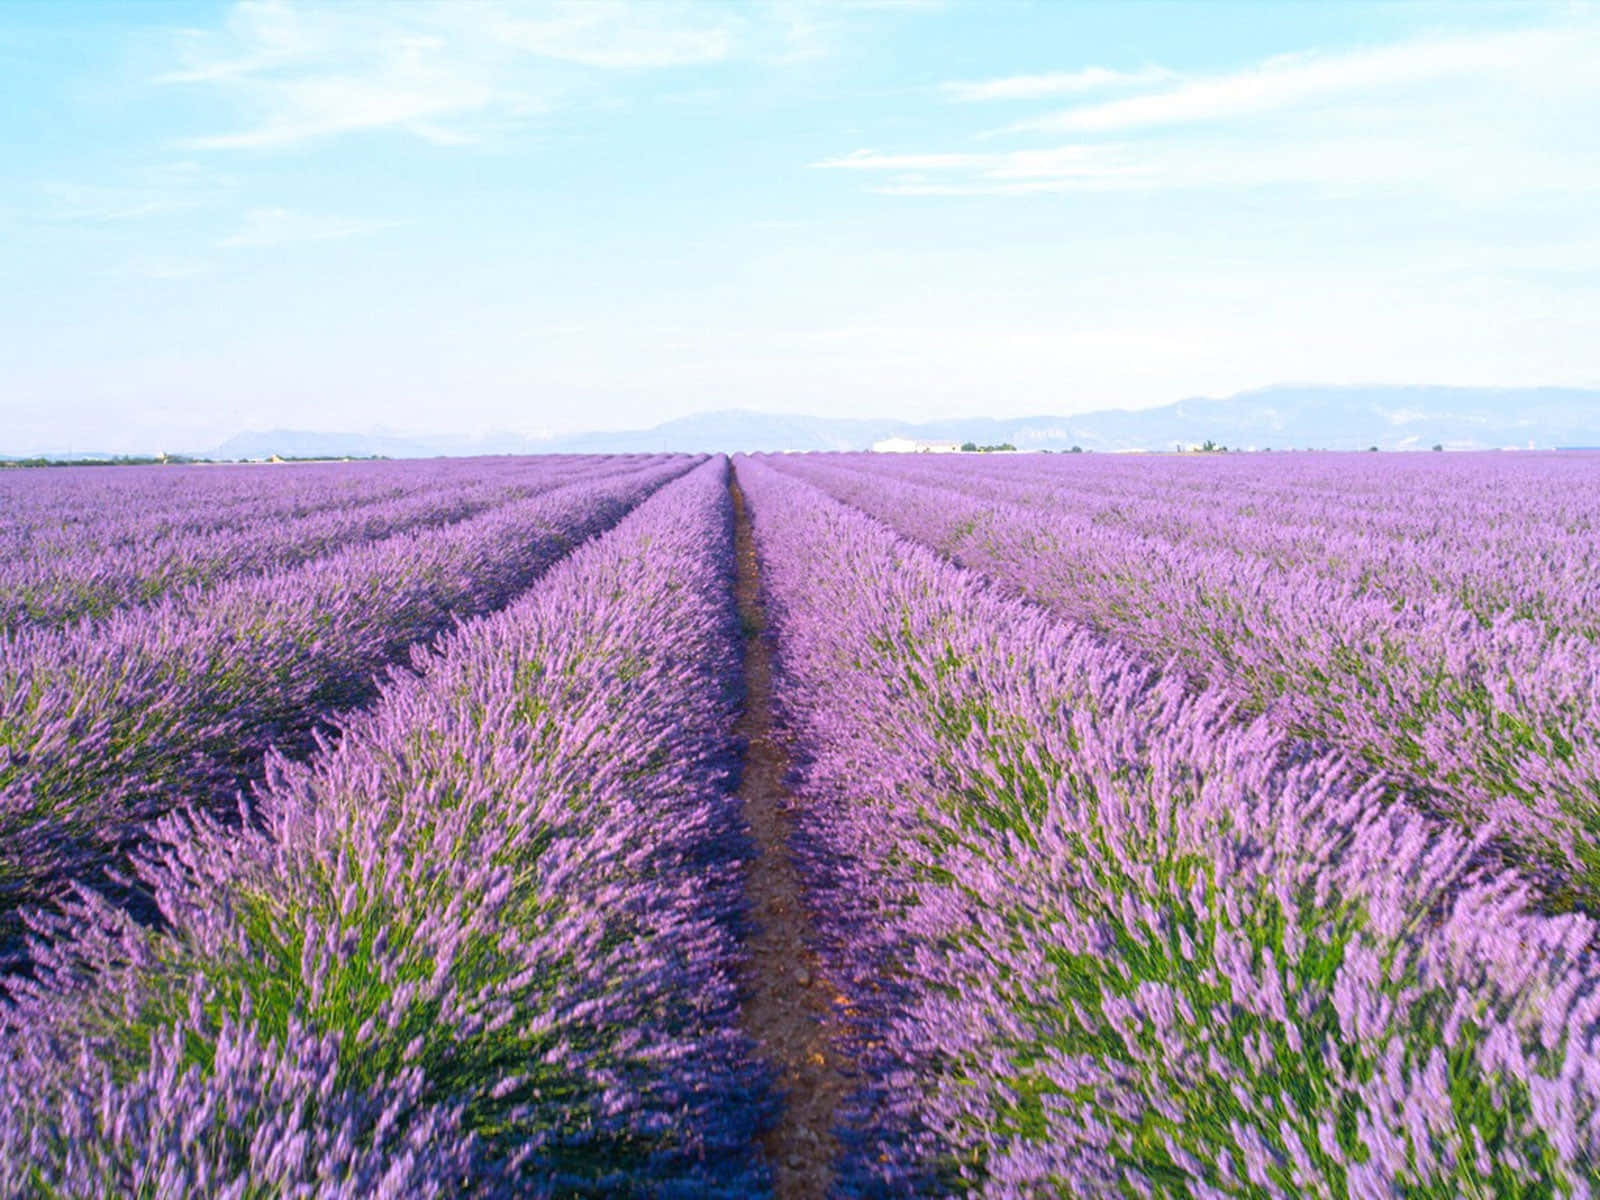 Take in the tranquility of a summer morning in a lavender field